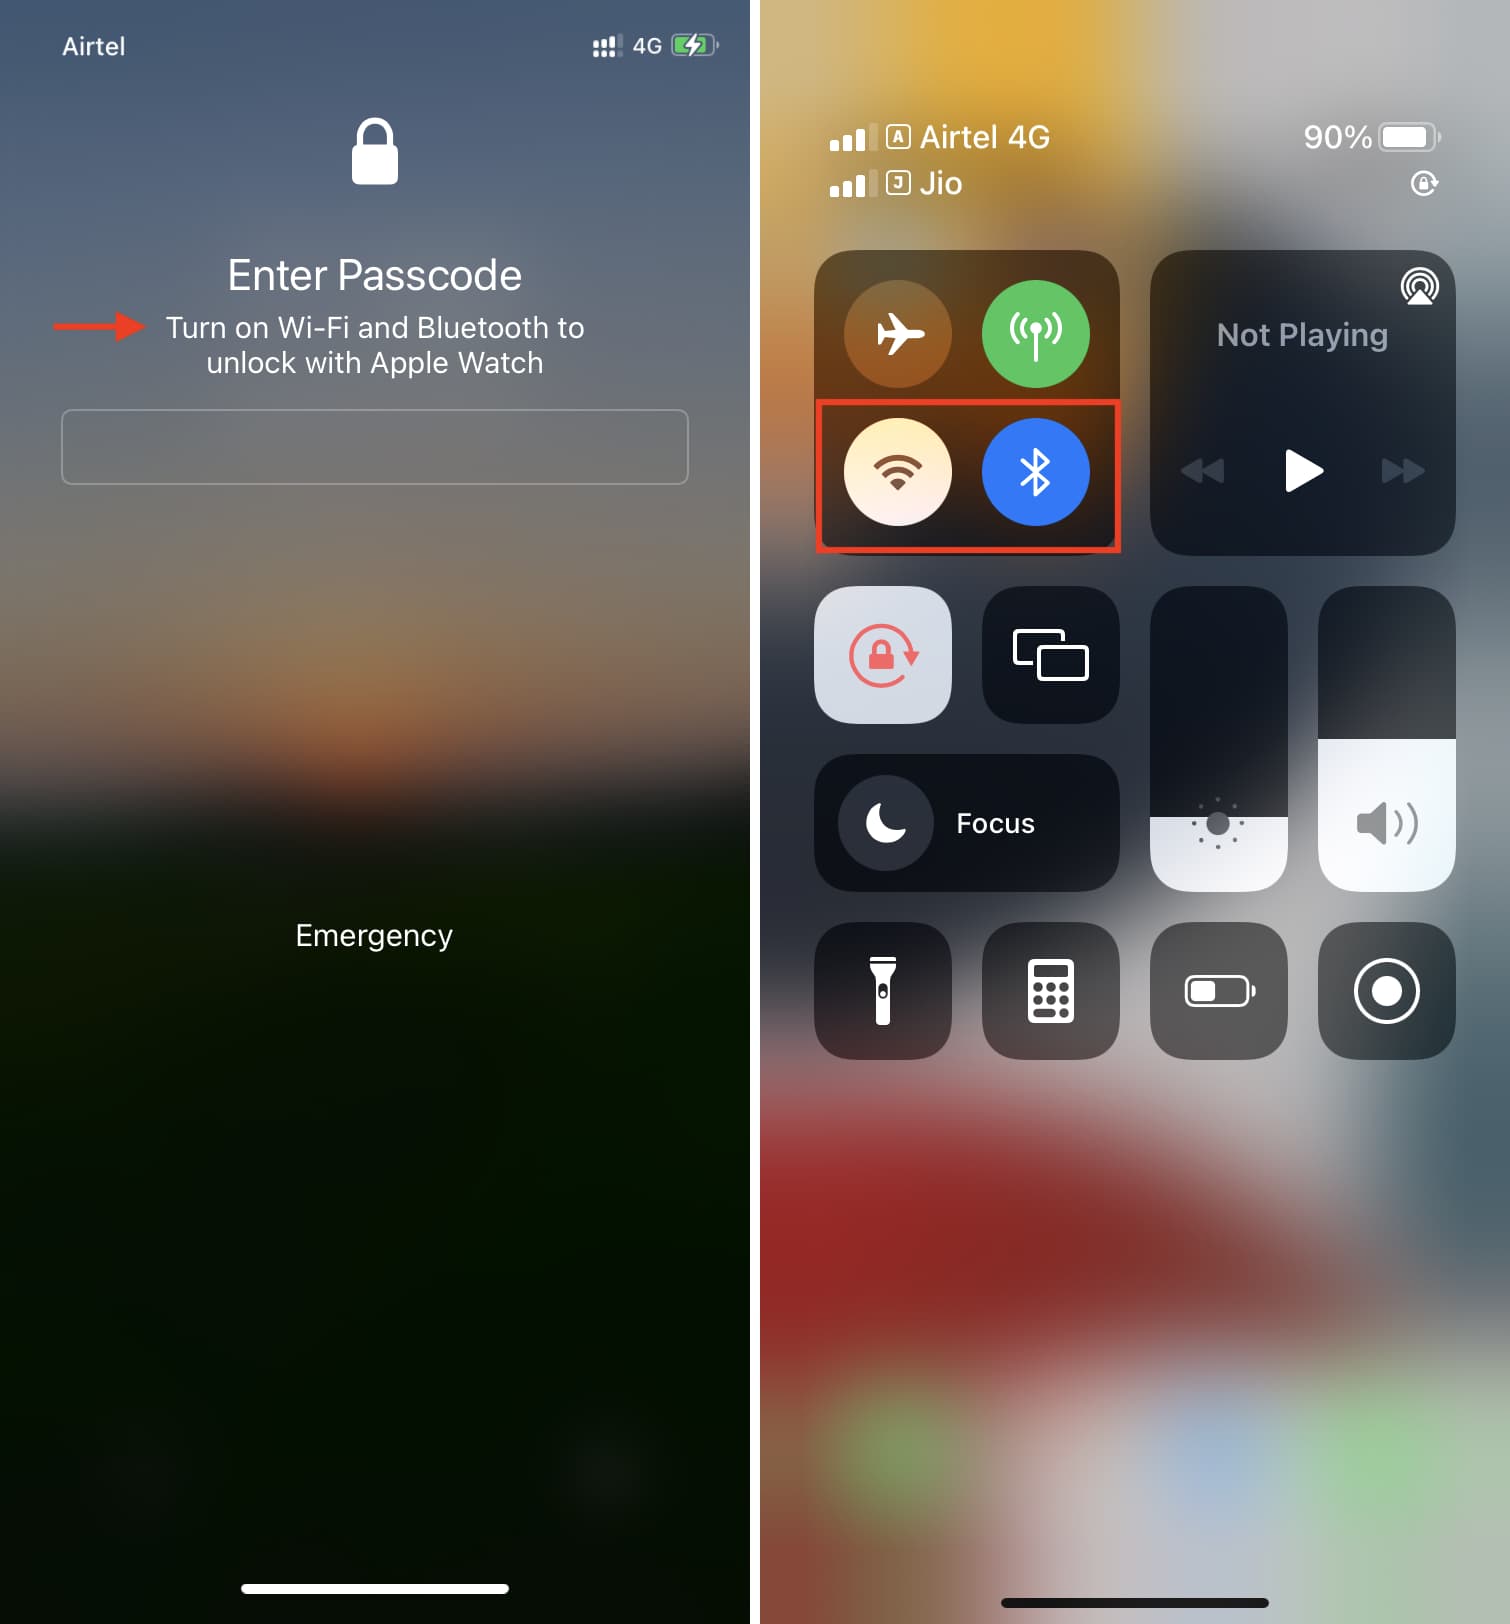 Turn on Wi-Fi and Bluetooth to unlock with Apple Watch